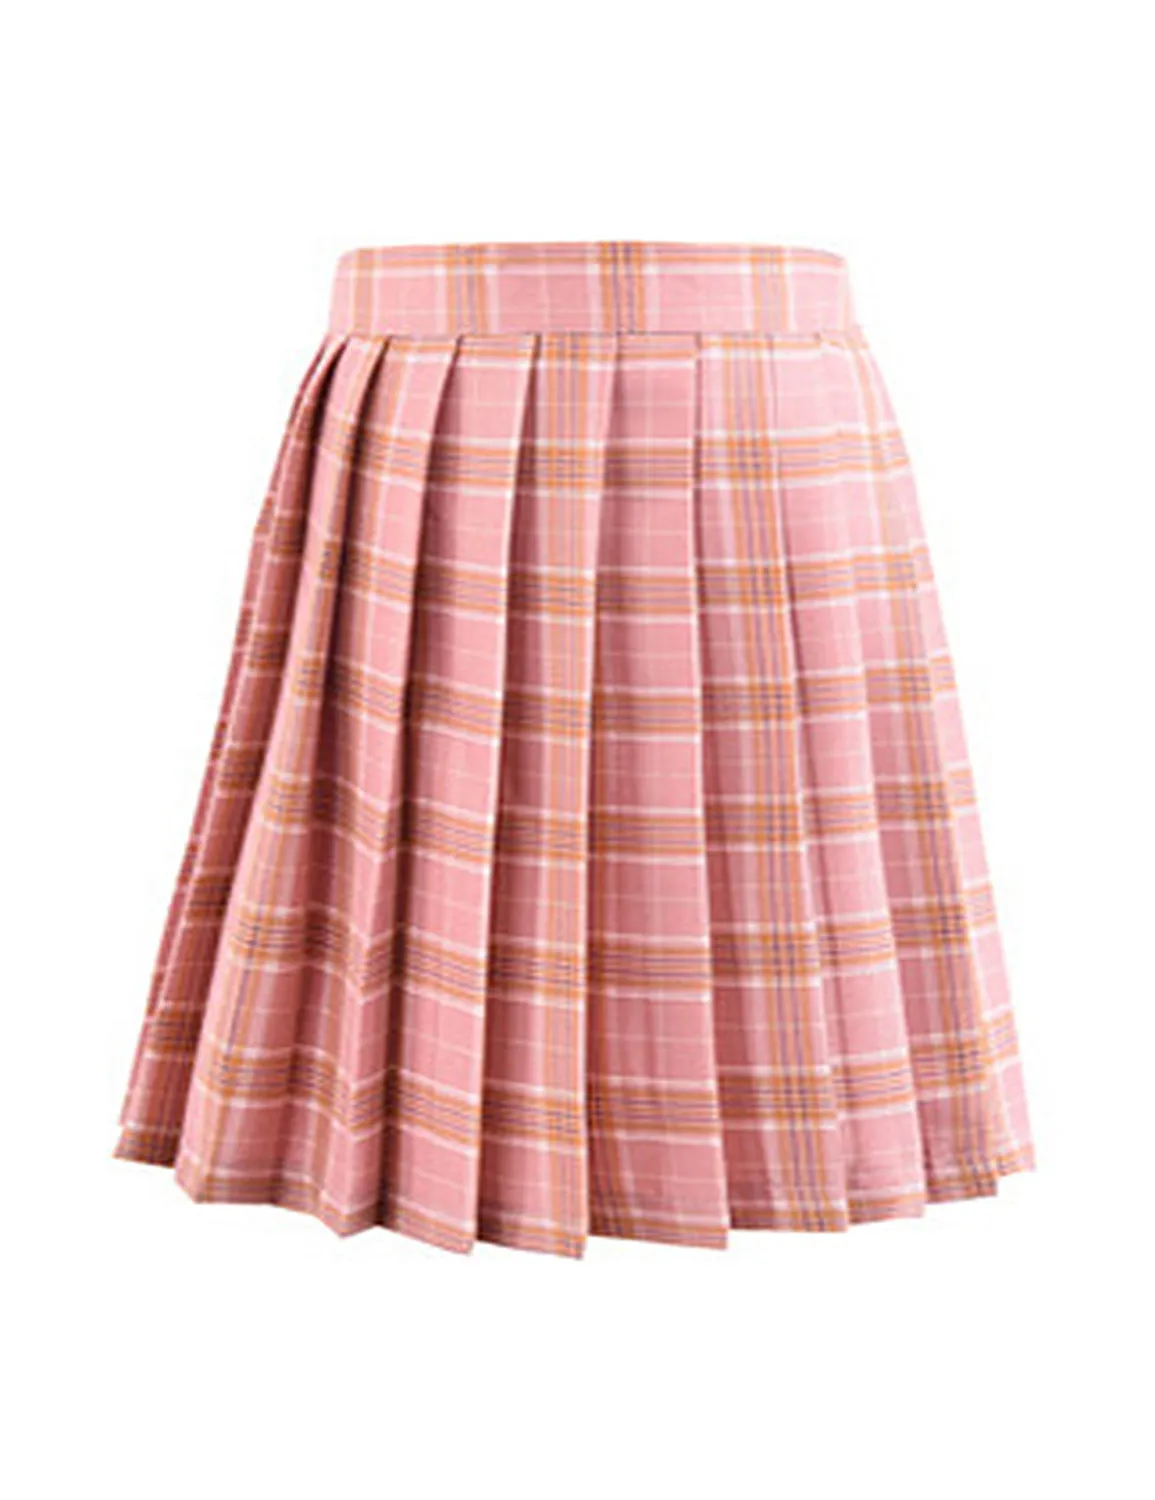 2020 Available Cheap with Uniform Skirts Cosplay Plaid Skirt with different colors size Homecoming Dresses JK01